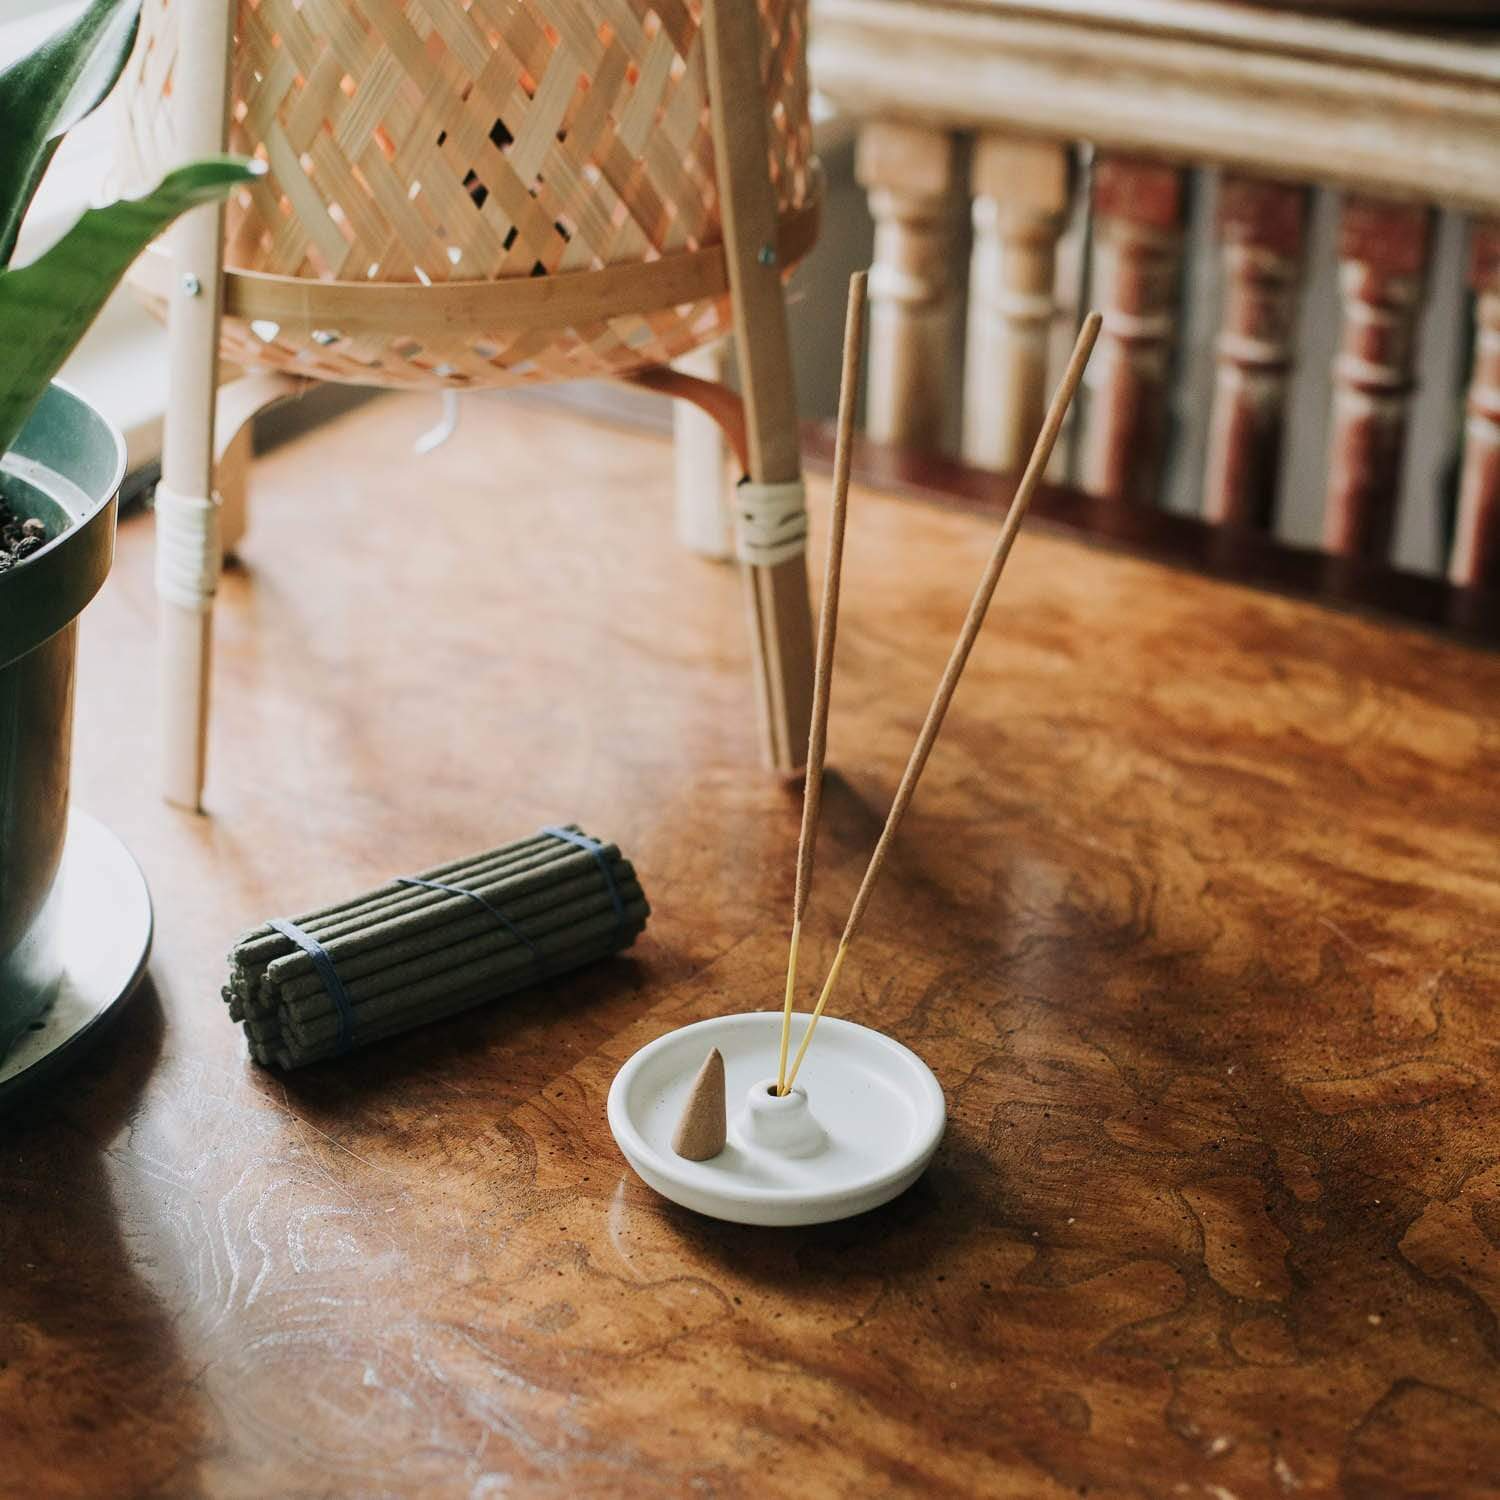 How to use an incense holder